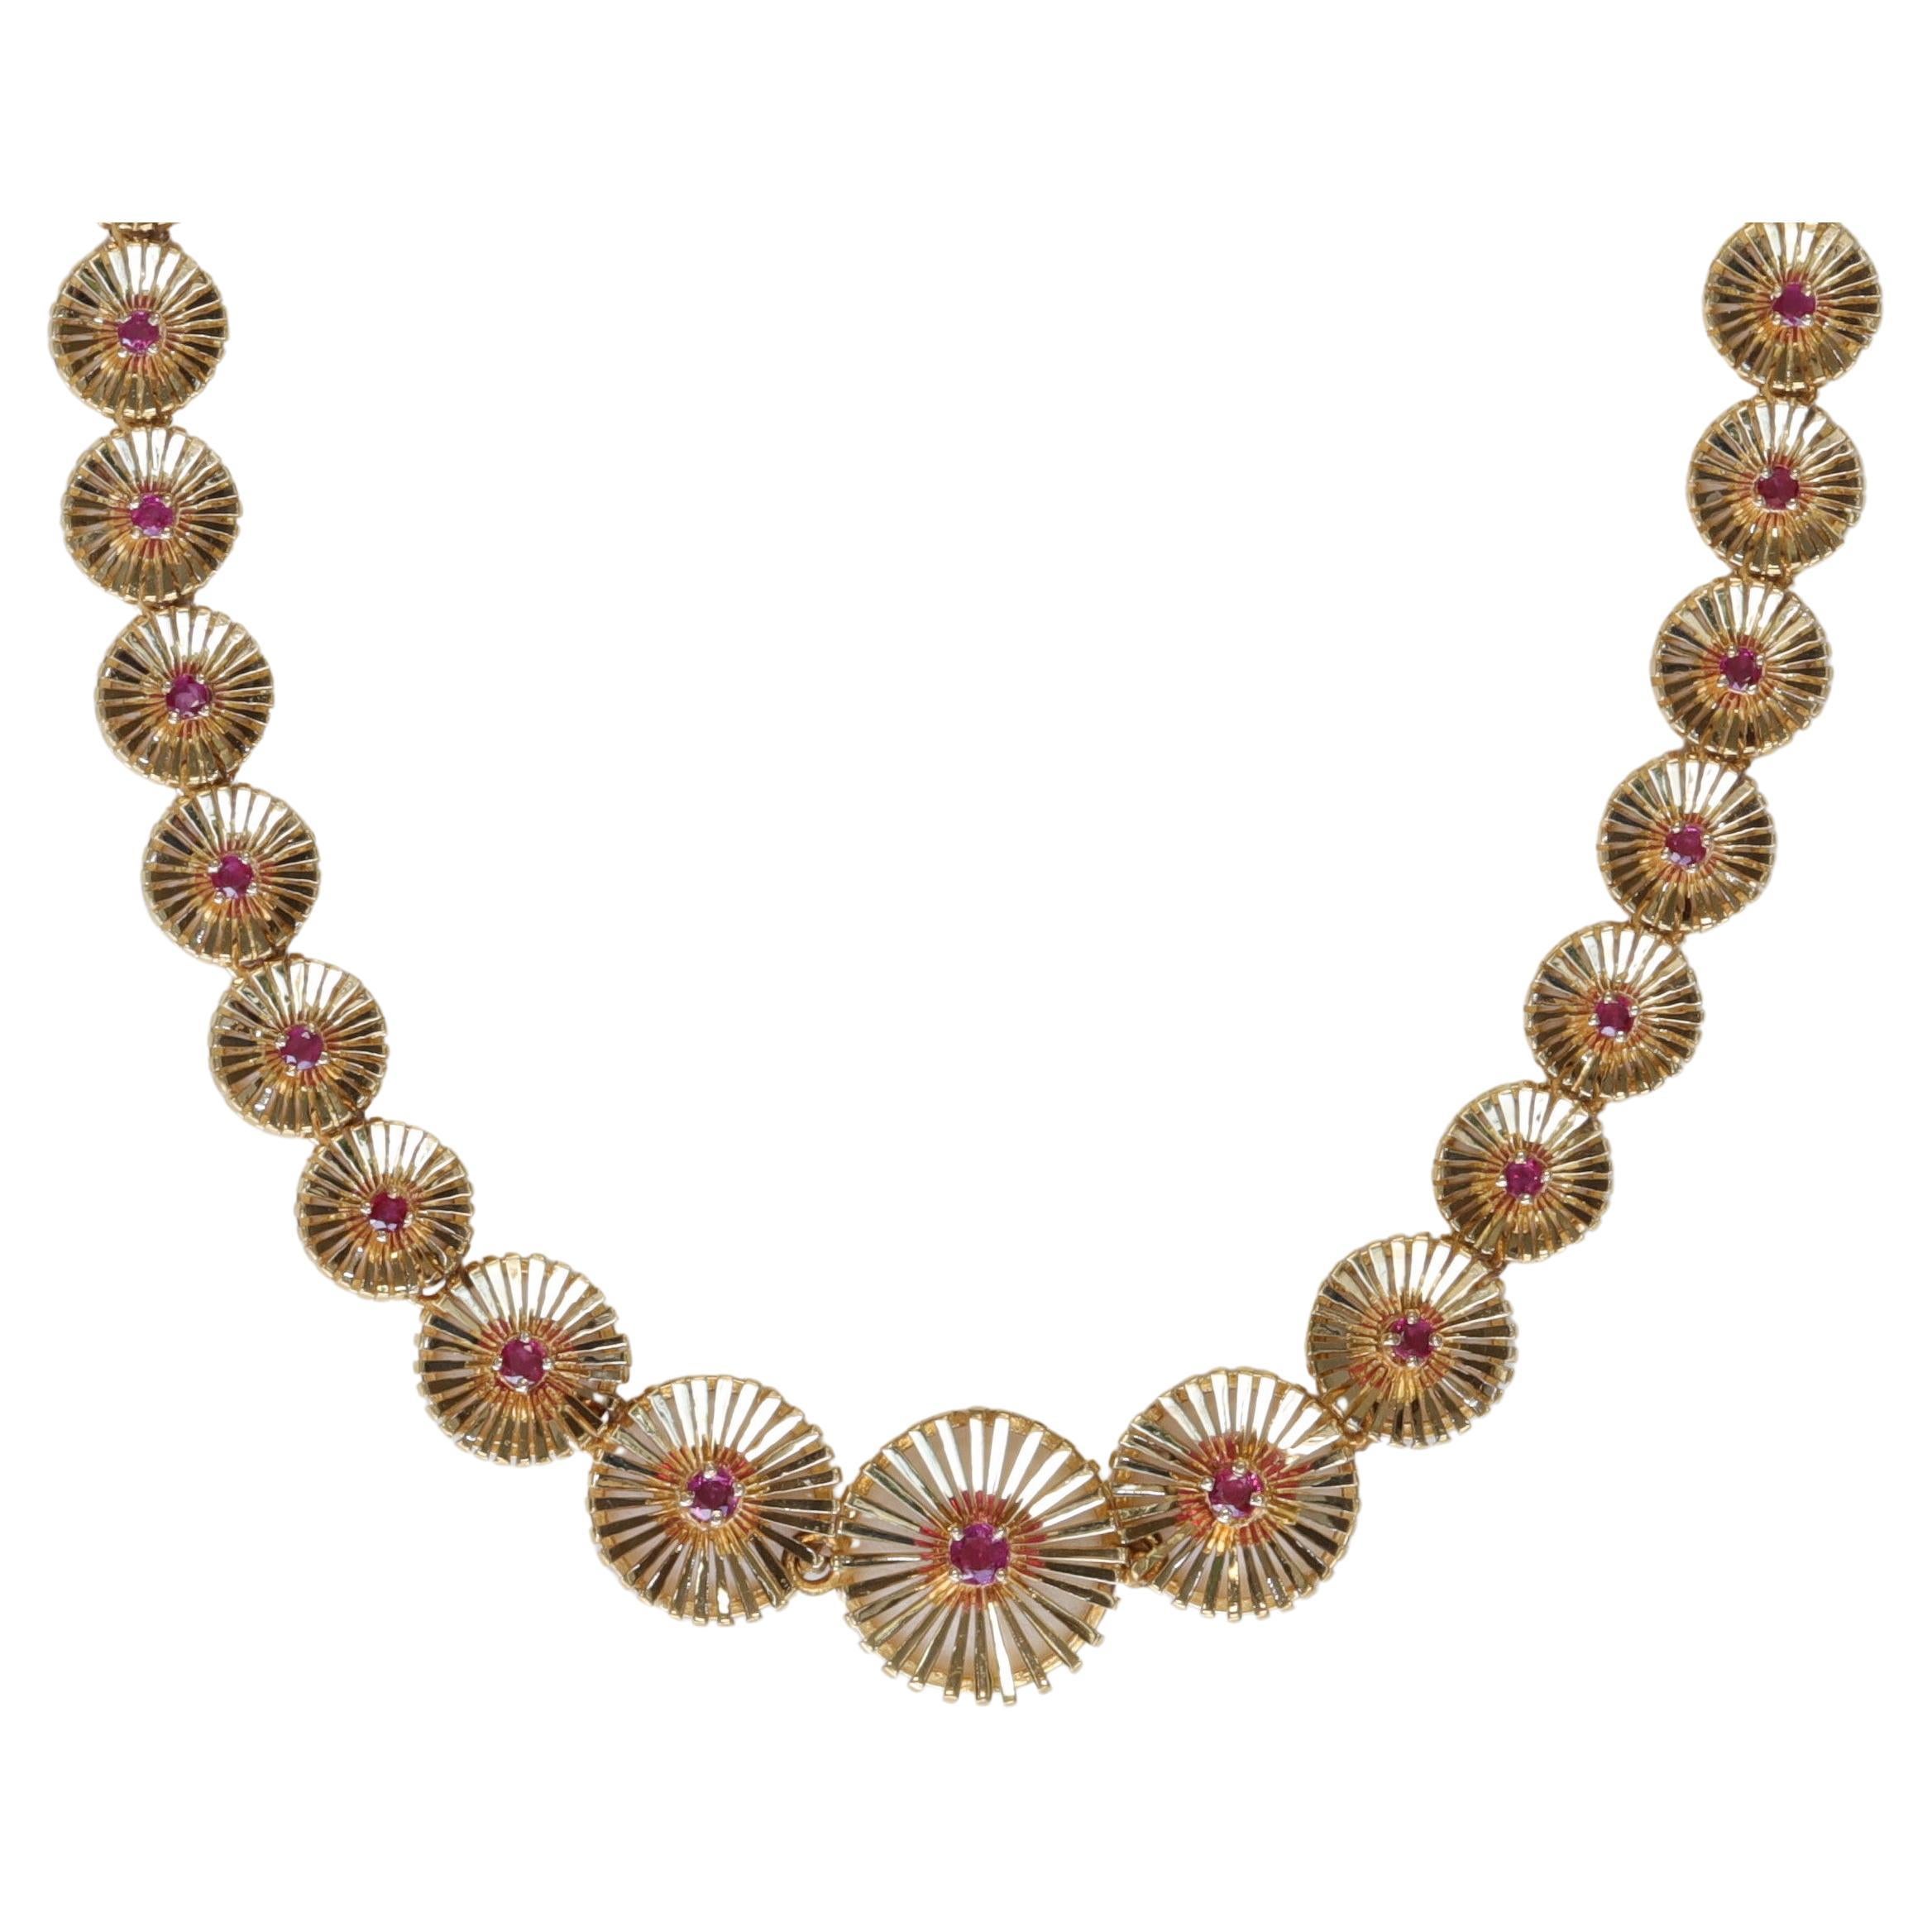 Cartier Mid Century Ruby Necklace in 18 Karat Yellow Gold Star Burst Motif For Sale